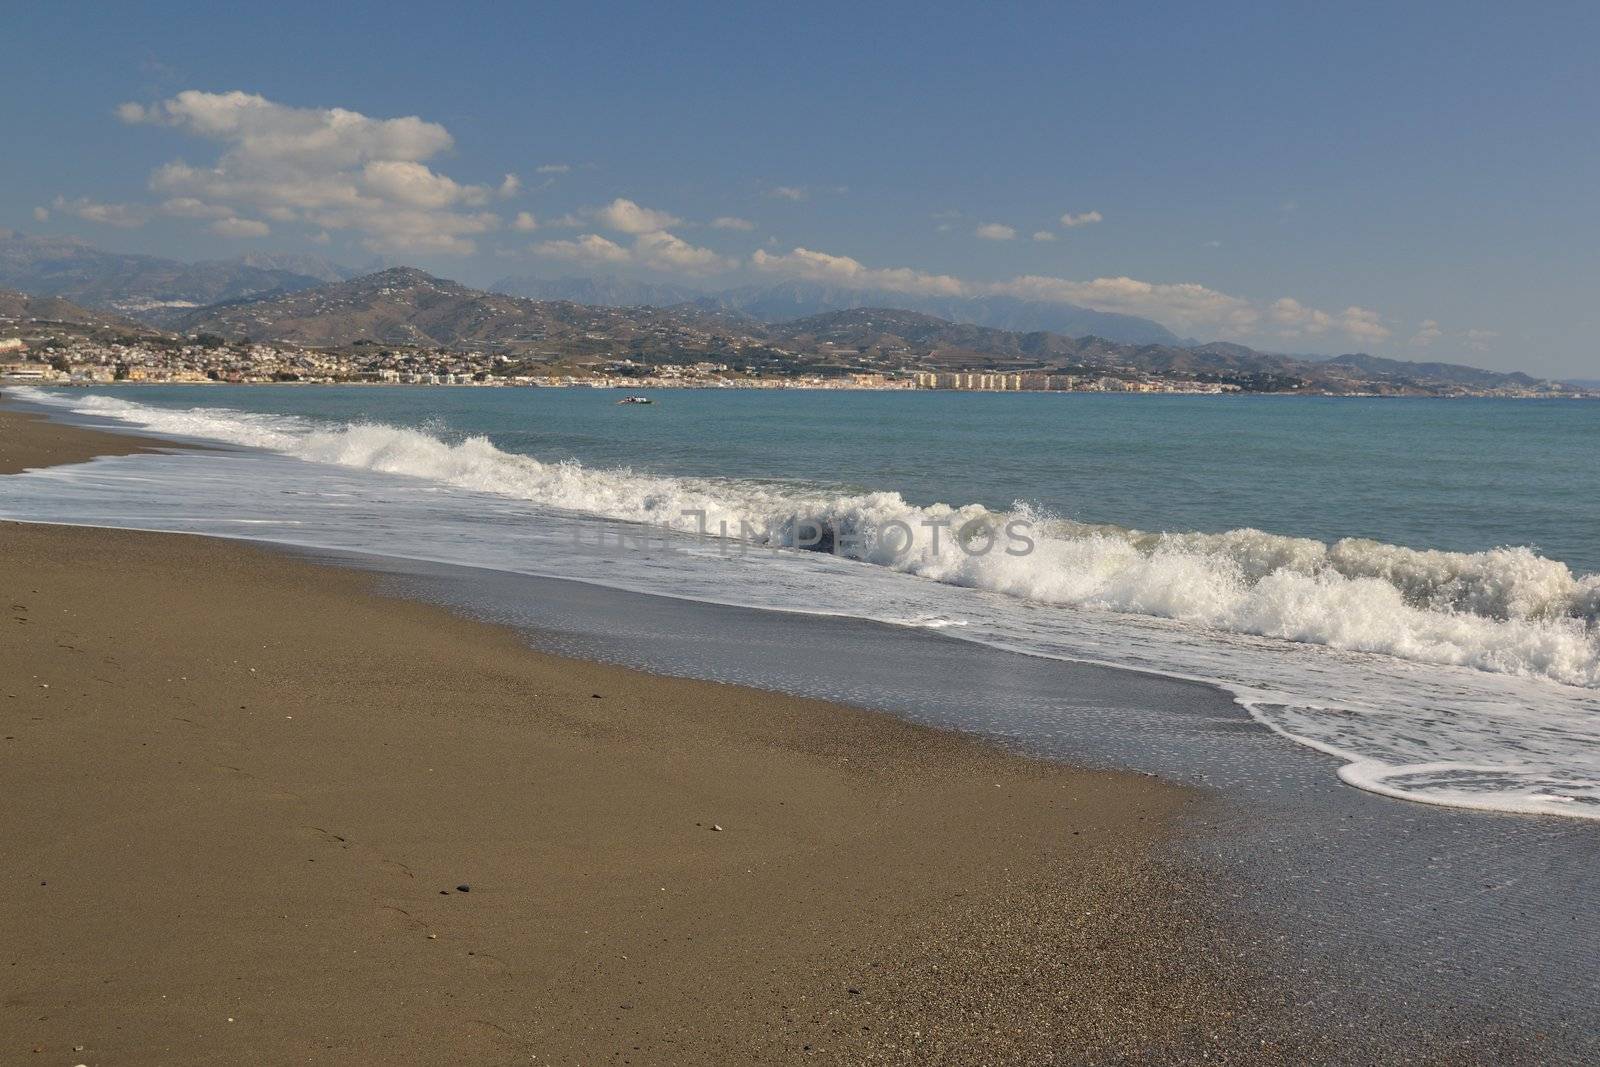 beaches of Nerja, a town fifty miles distant from Malaga